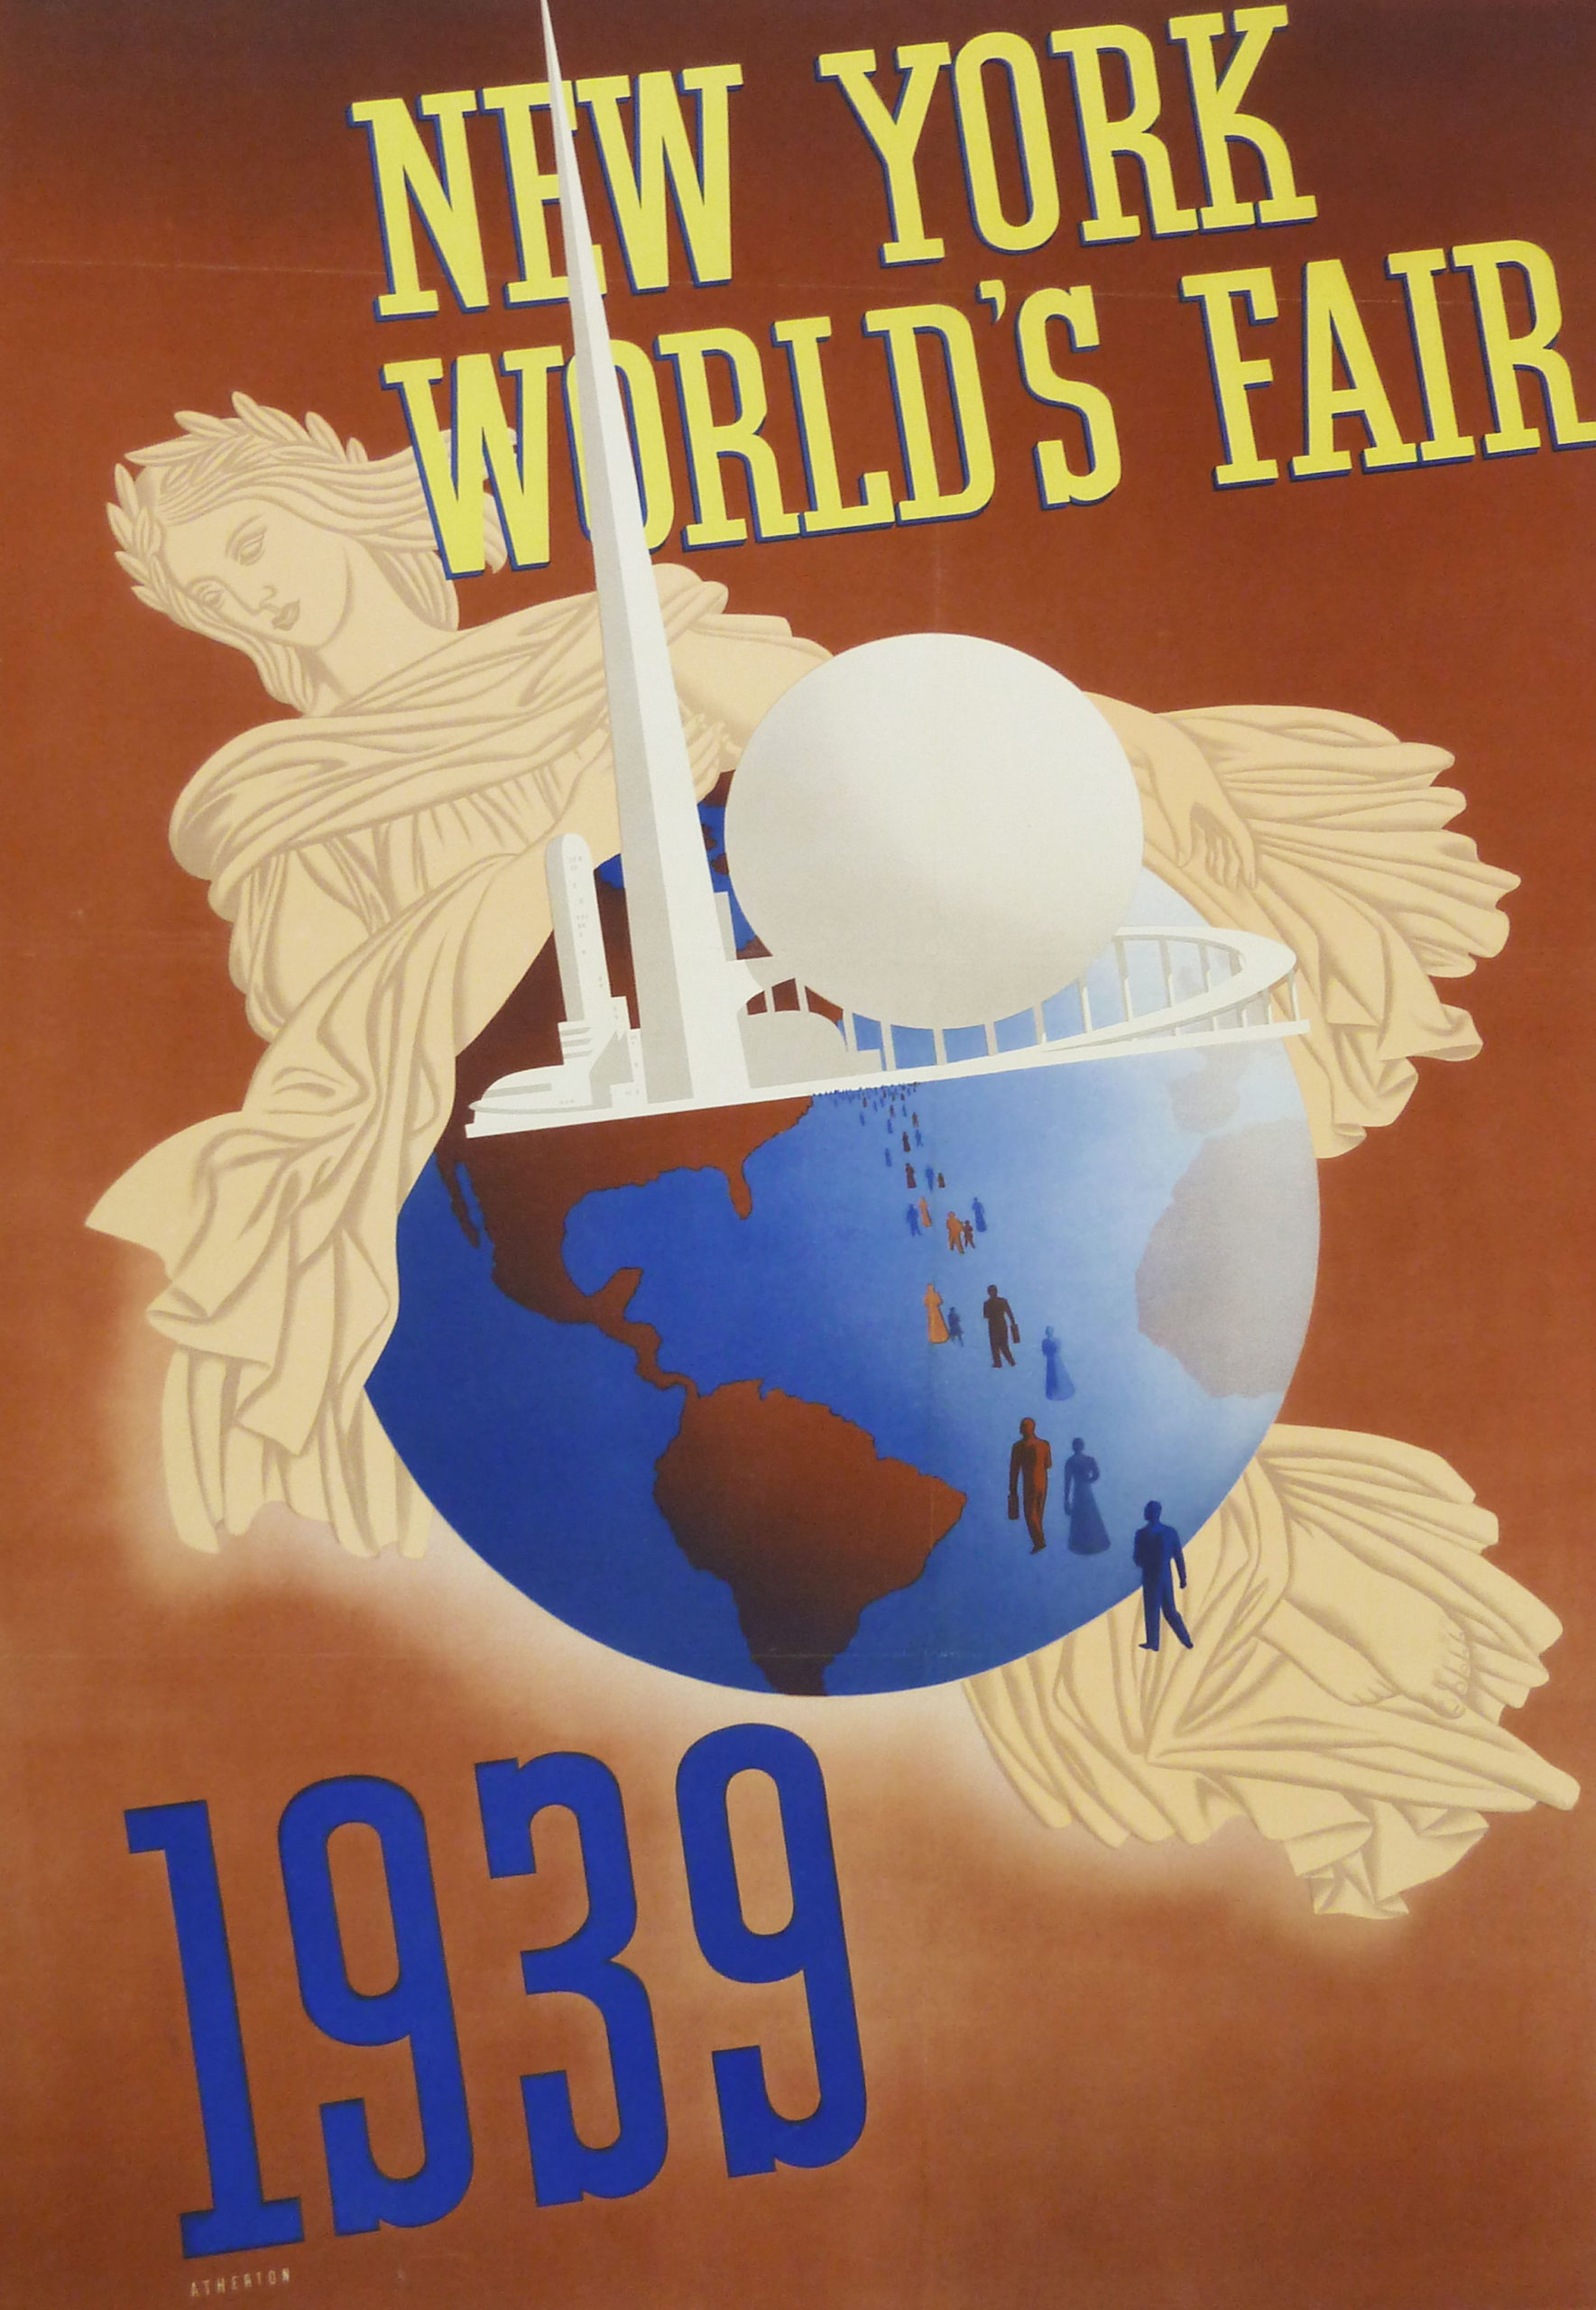 A brown exposition poster with a cream, stylized Lady Liberty cradling the Earth. Ejecting out of Earth are The Trylon and Perisphere monuments from the 1939 World’s Fair. Matching the brown and deep blue Earth are a trail of figures walking towards the monuments. At the top of the poster, in butter yellow, reads “New York World’s Fair”. At the bottom of the poster, in deep blue, reads “1939”.